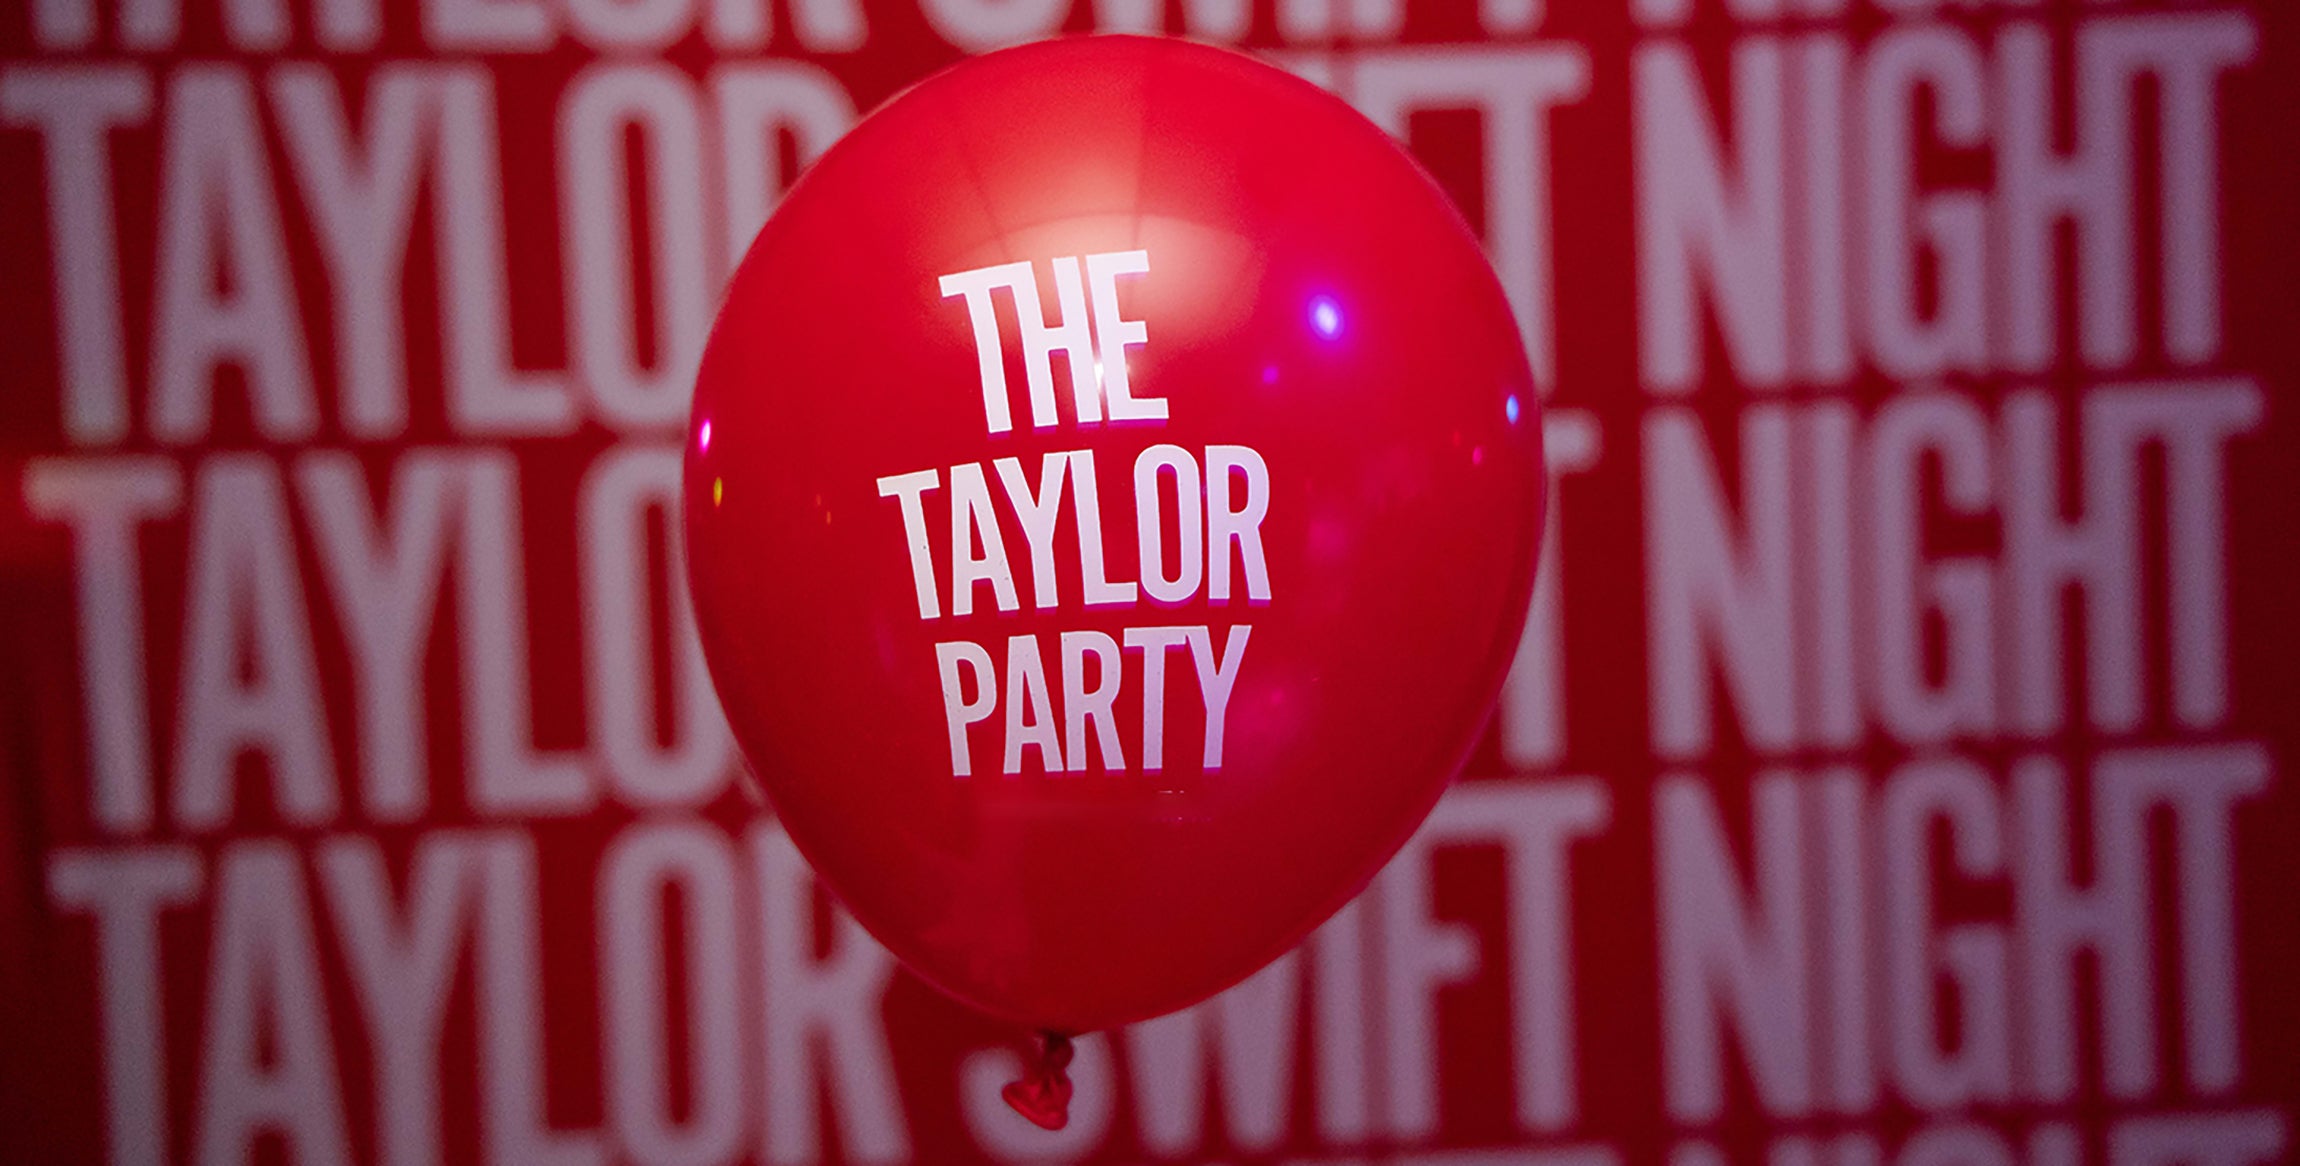 updated presale code for THE TAYLOR PARTY: TAYLOR SWIFT NIGHT - Event is 18+ advanced tickets in Louisville at Mercury Ballroom